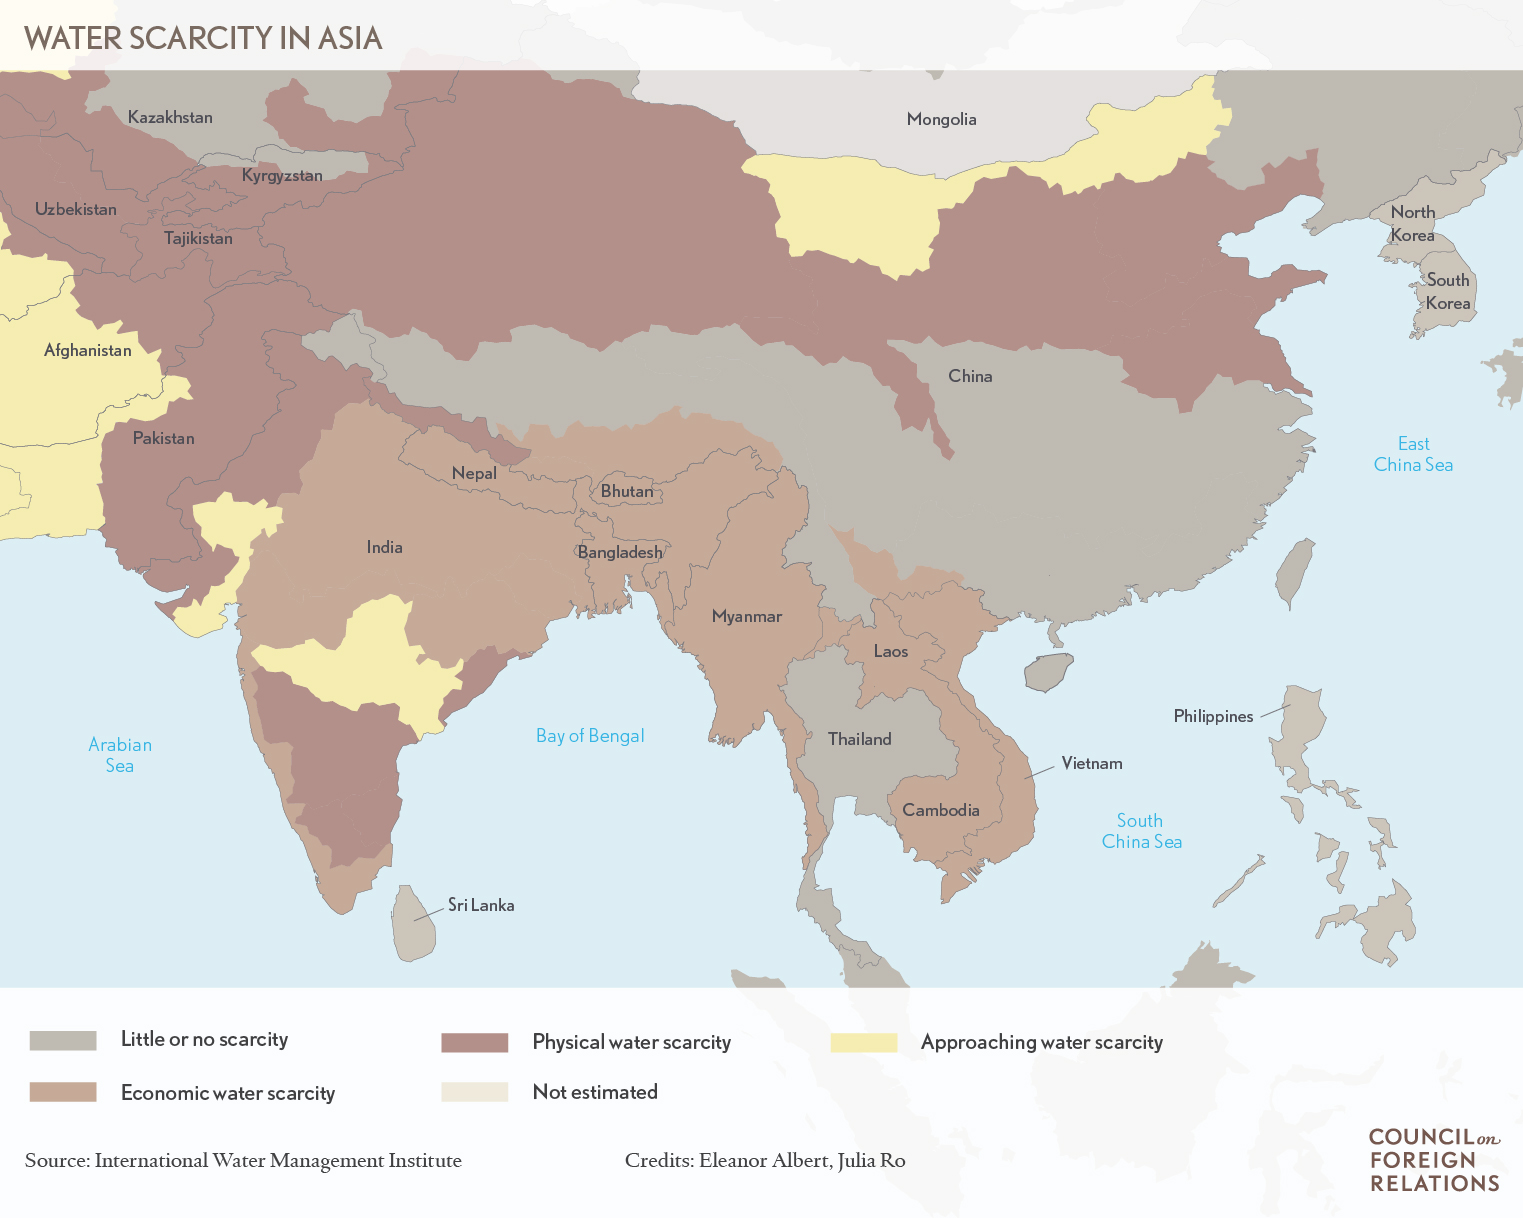 Water scarcity in Asia